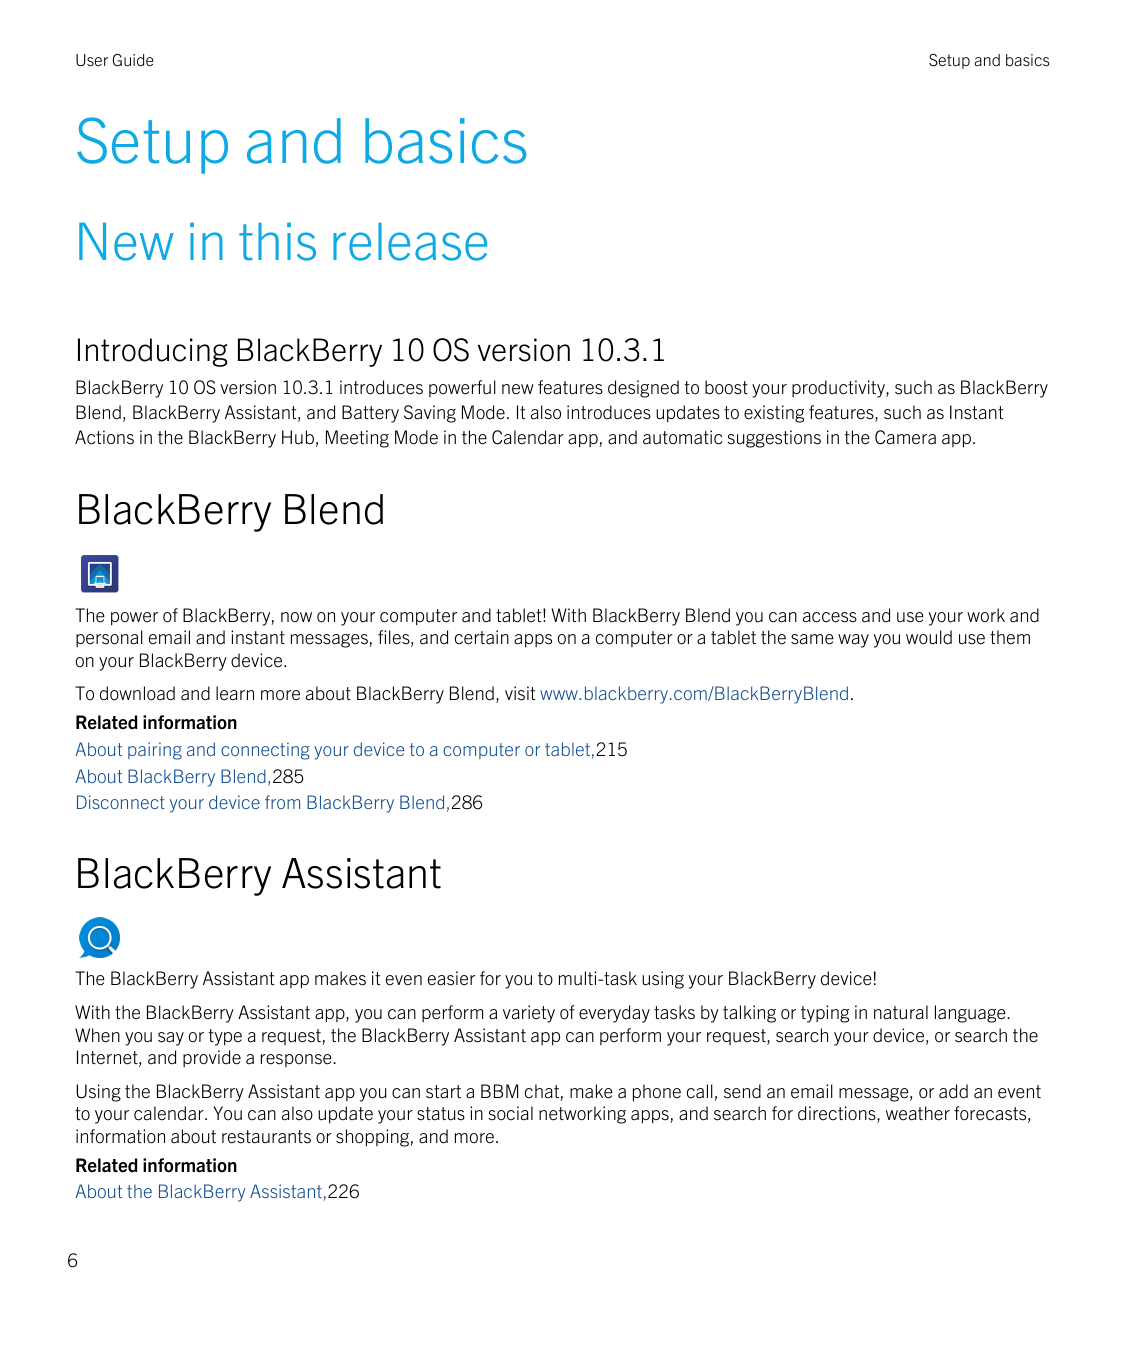 User GuideSetup and basicsSetup and basicsNew in this releaseIntroducing BlackBerry 10 OS version 10.3.1BlackBerry 10 OS version